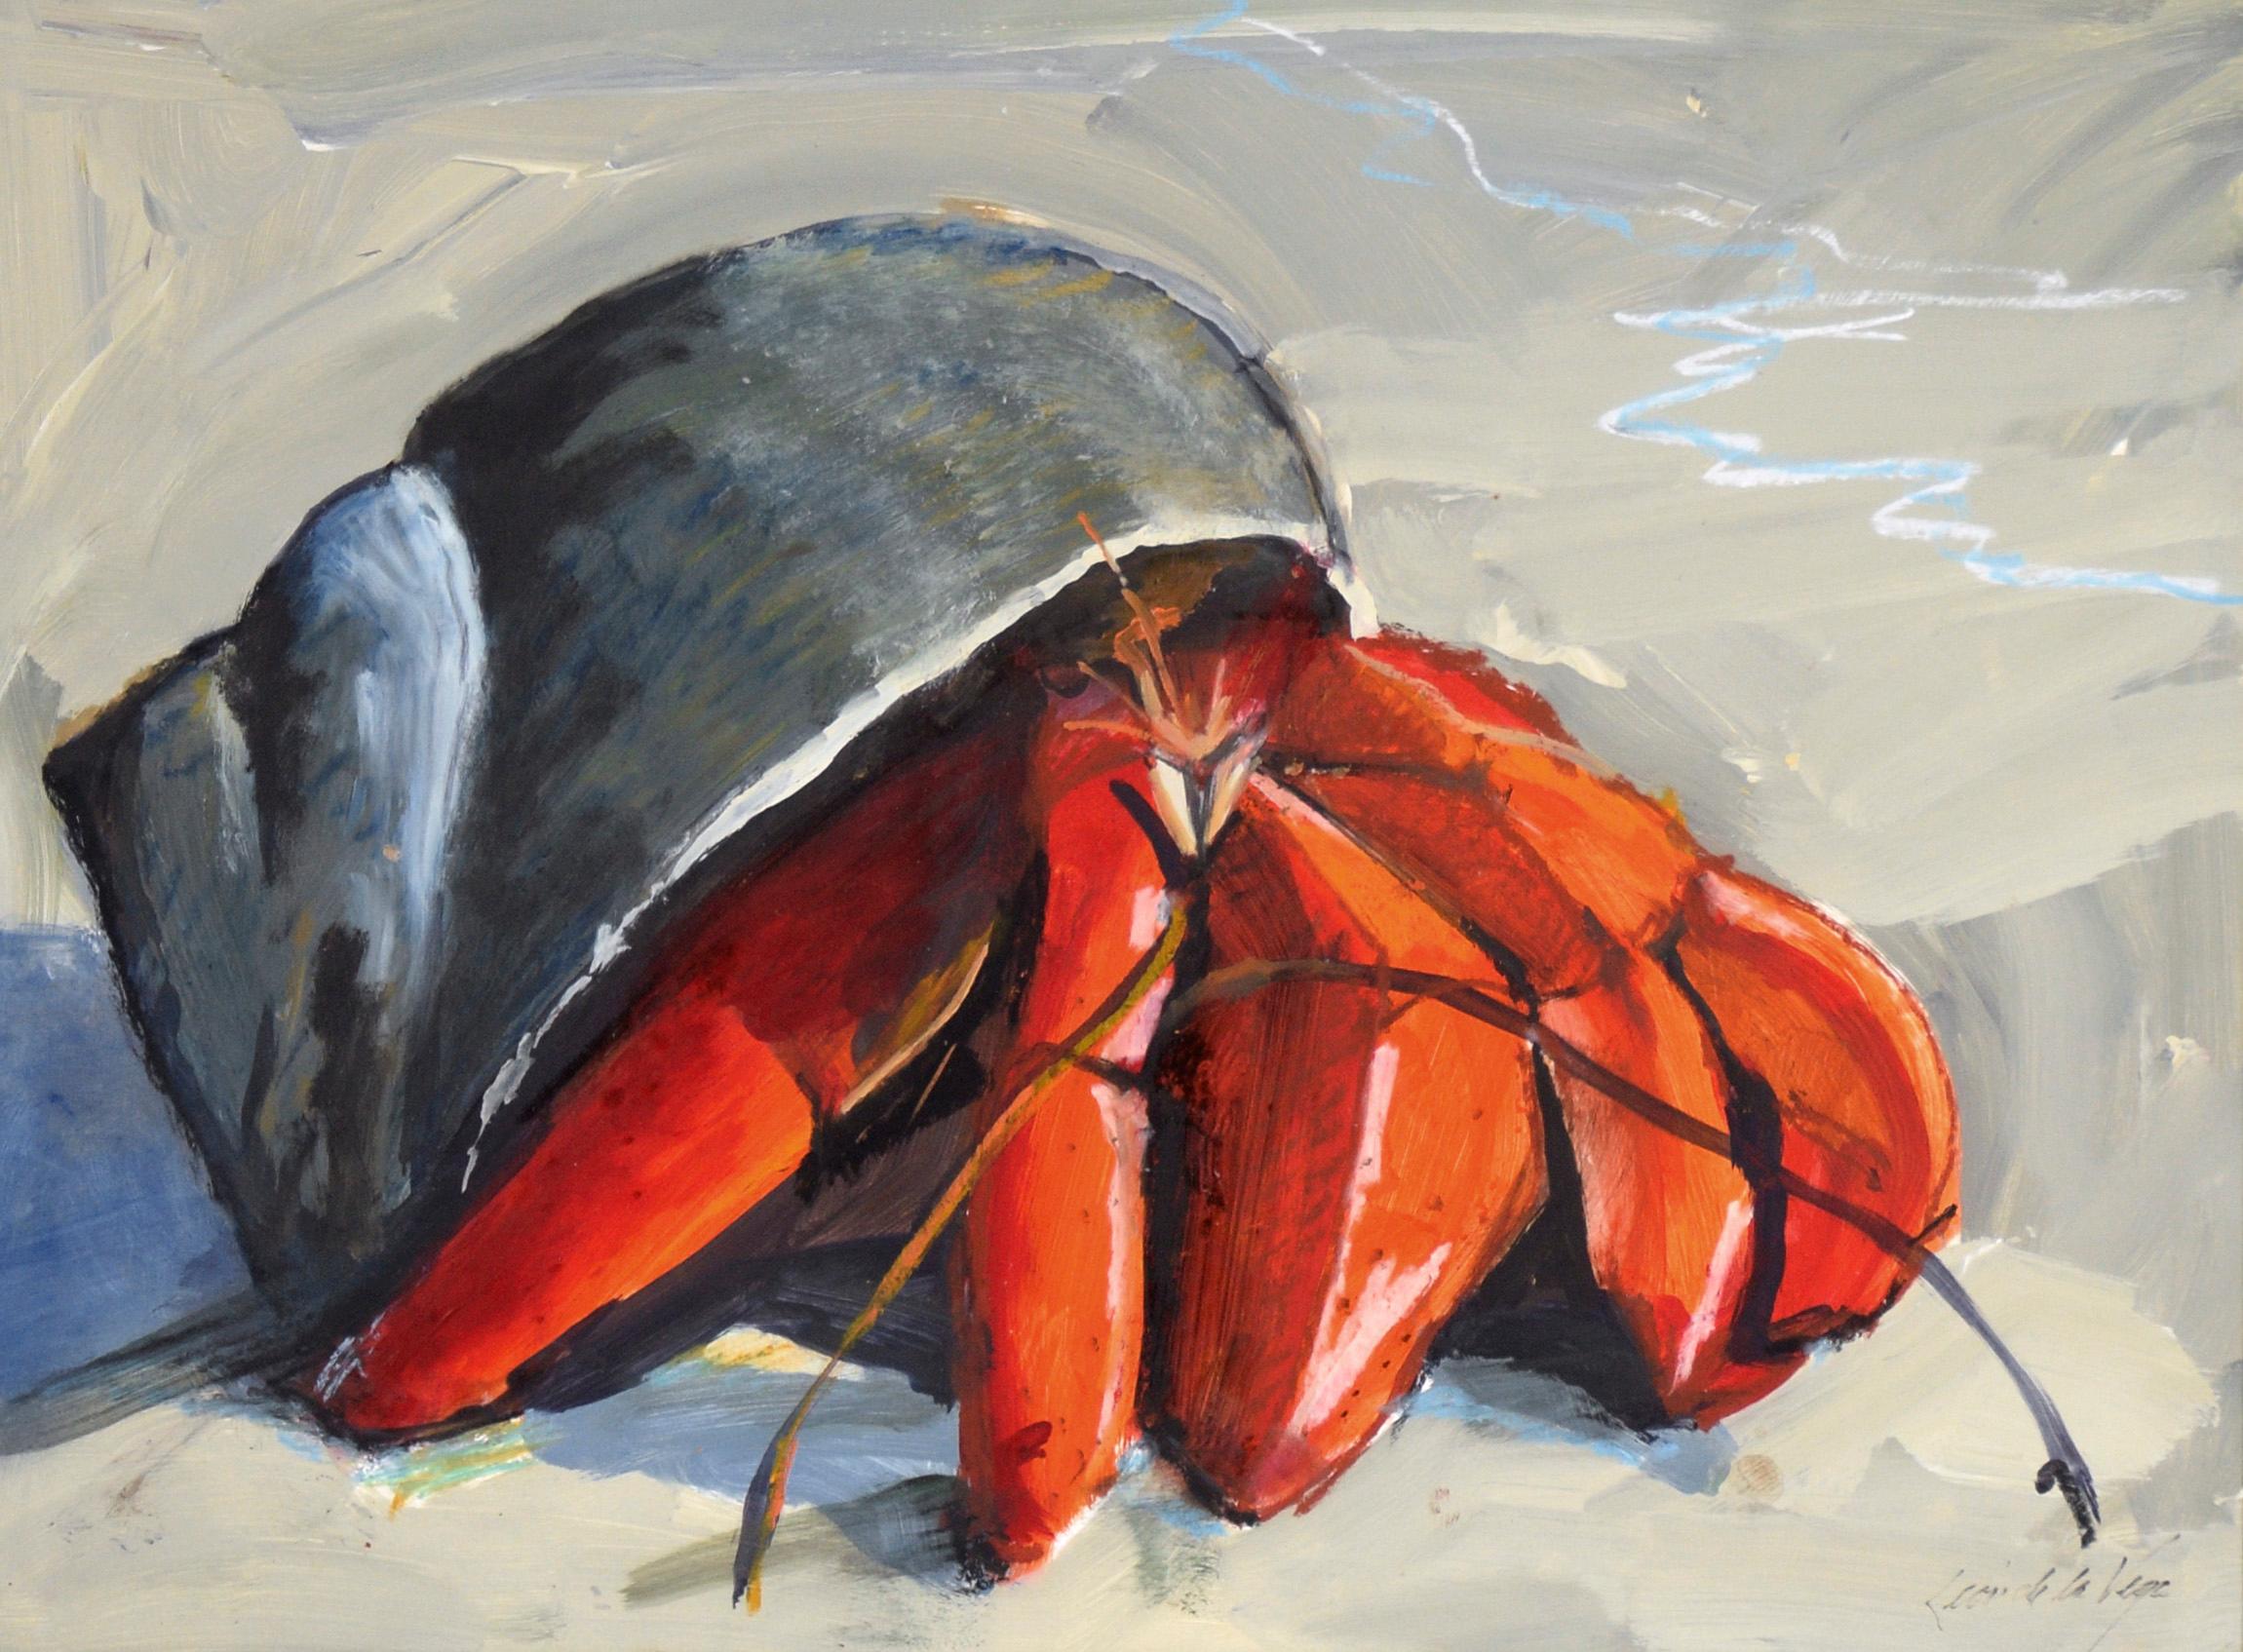 Hermit Crab on the Sand in Acrylic on Paper - Painting by Federico Leon de la Vega